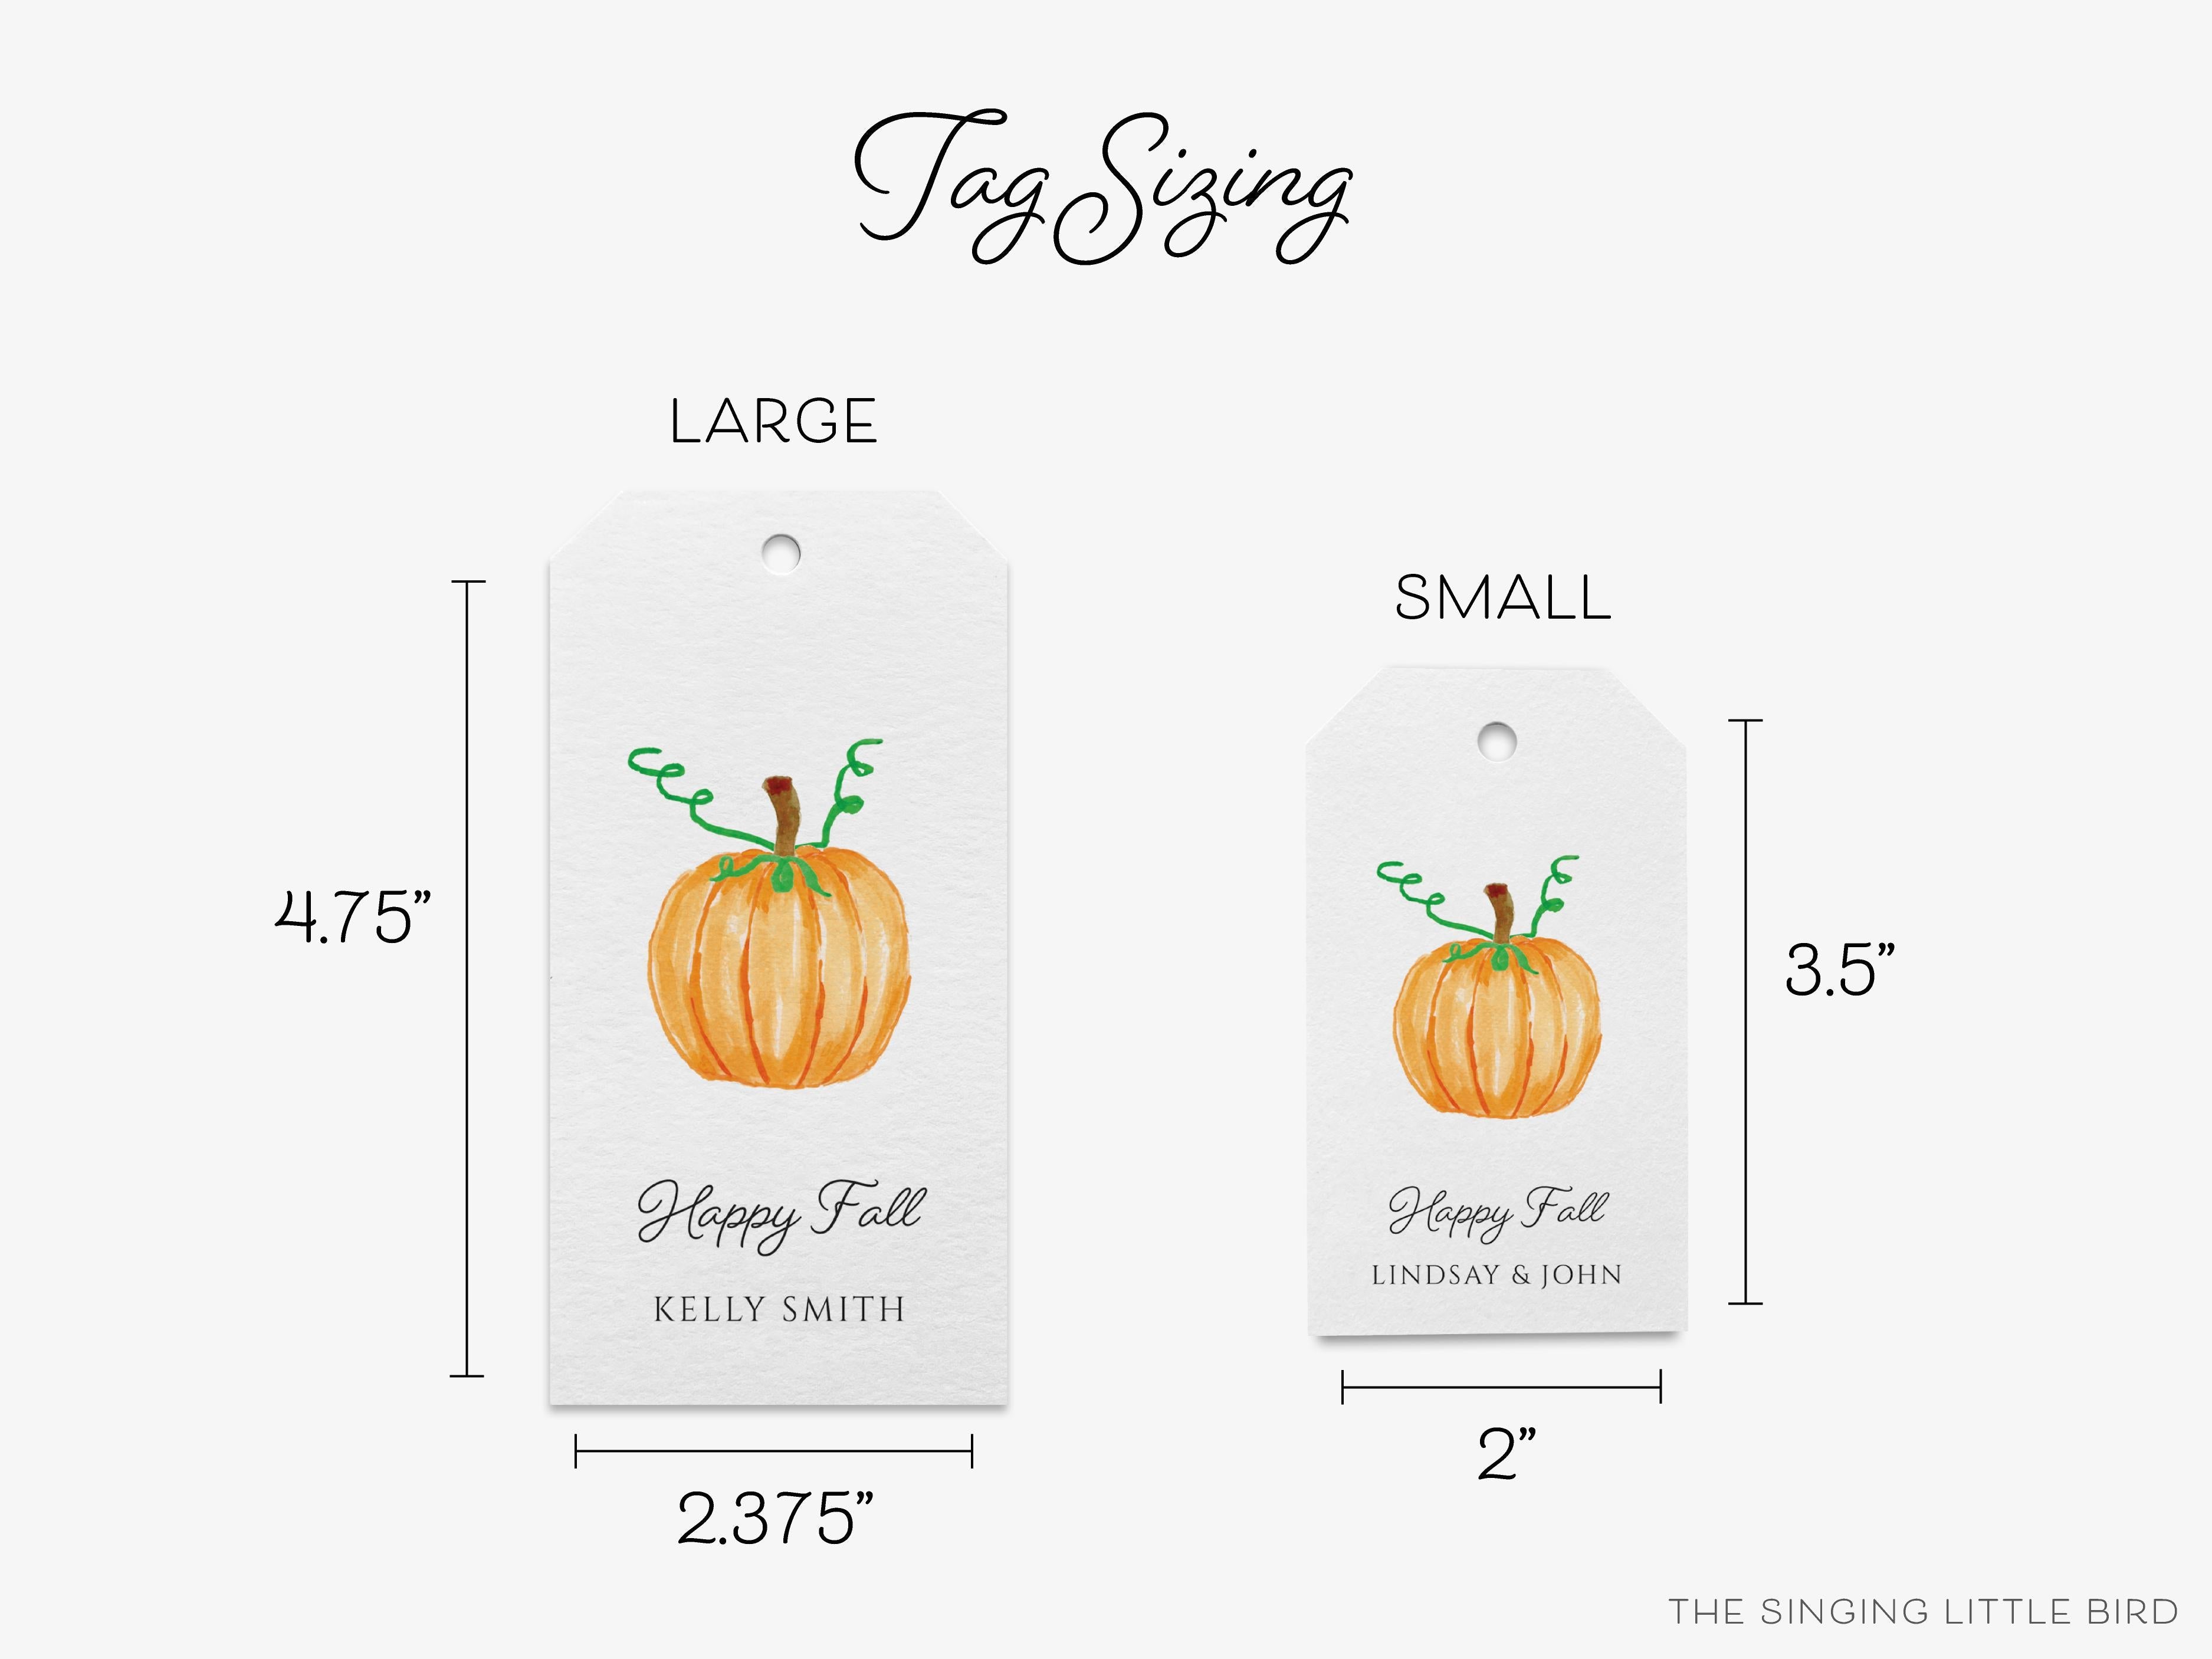 Personalized Pumpkin Gift Tags-These gift tags come in sets, hole-punched with white twine and feature our hand-painted watercolor pumpkin, printed in the USA on 120lb textured stock. They make great tags for gifting or gifts for the Fall season lover in your life.-The Singing Little Bird